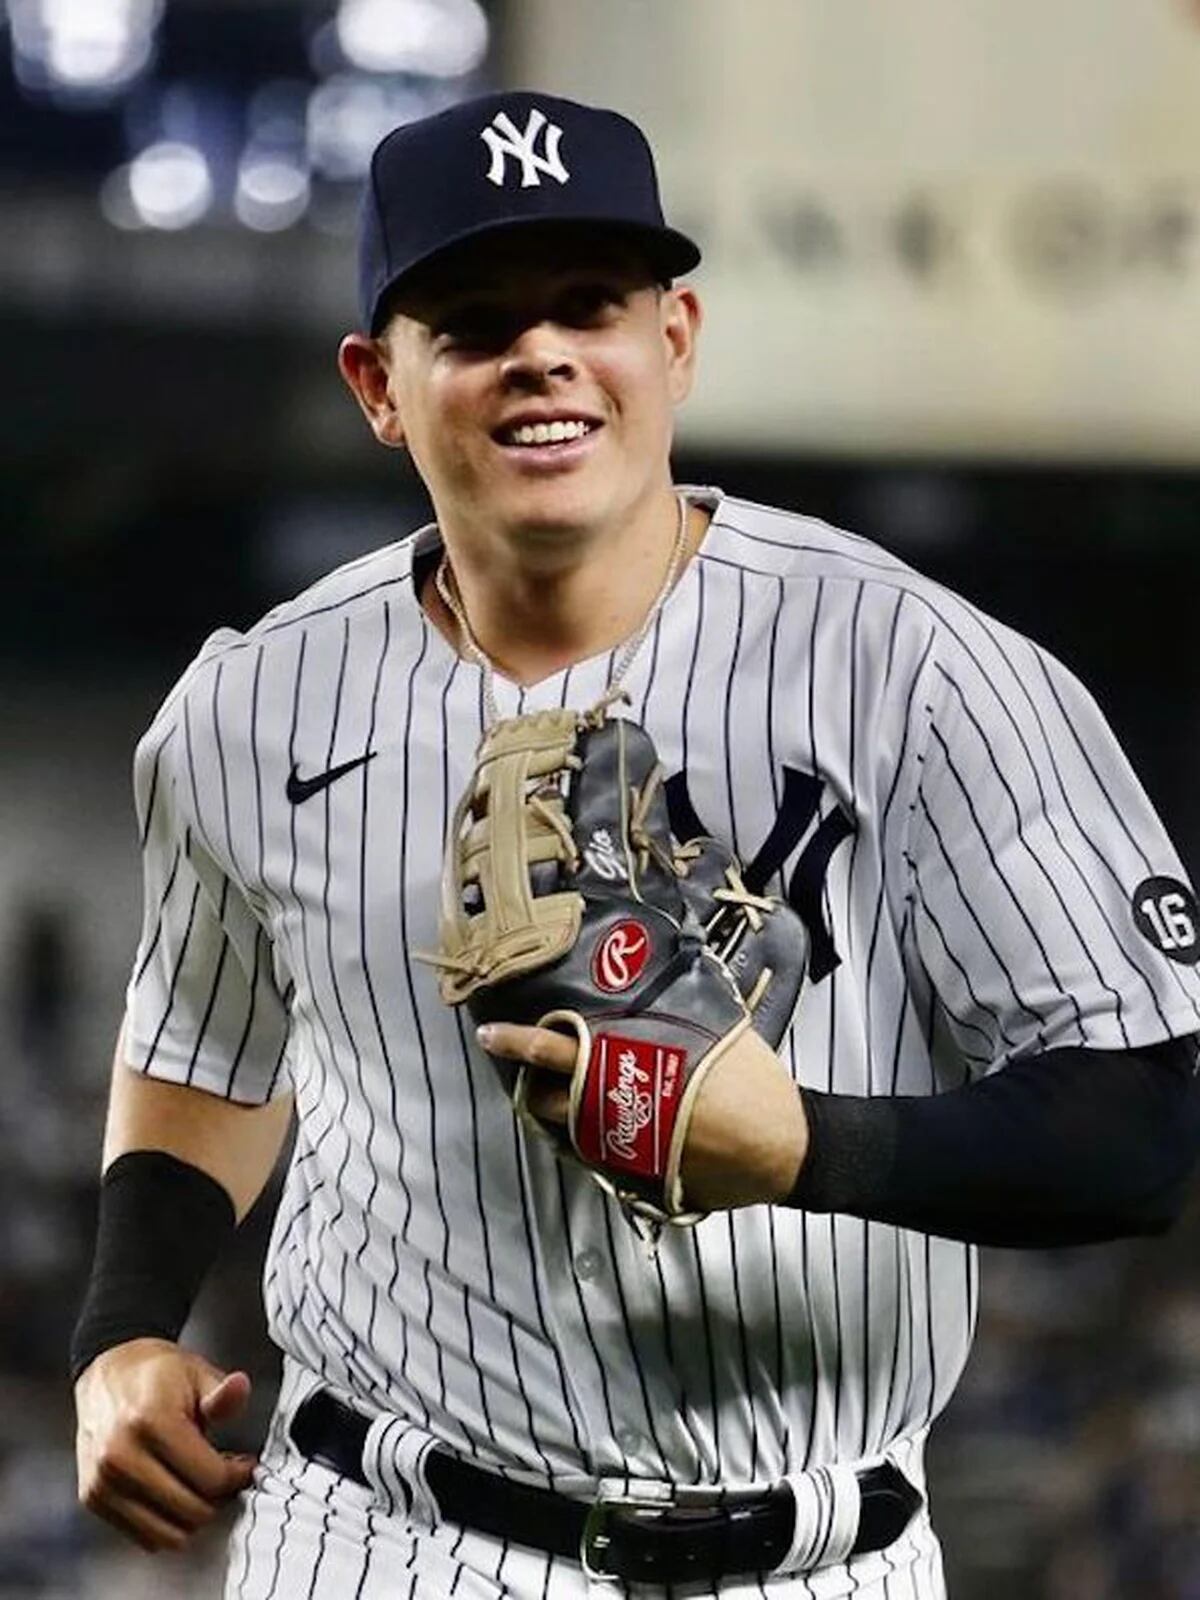 I'm going to miss the Bronx boys a lot”: Giovanny Urshela after